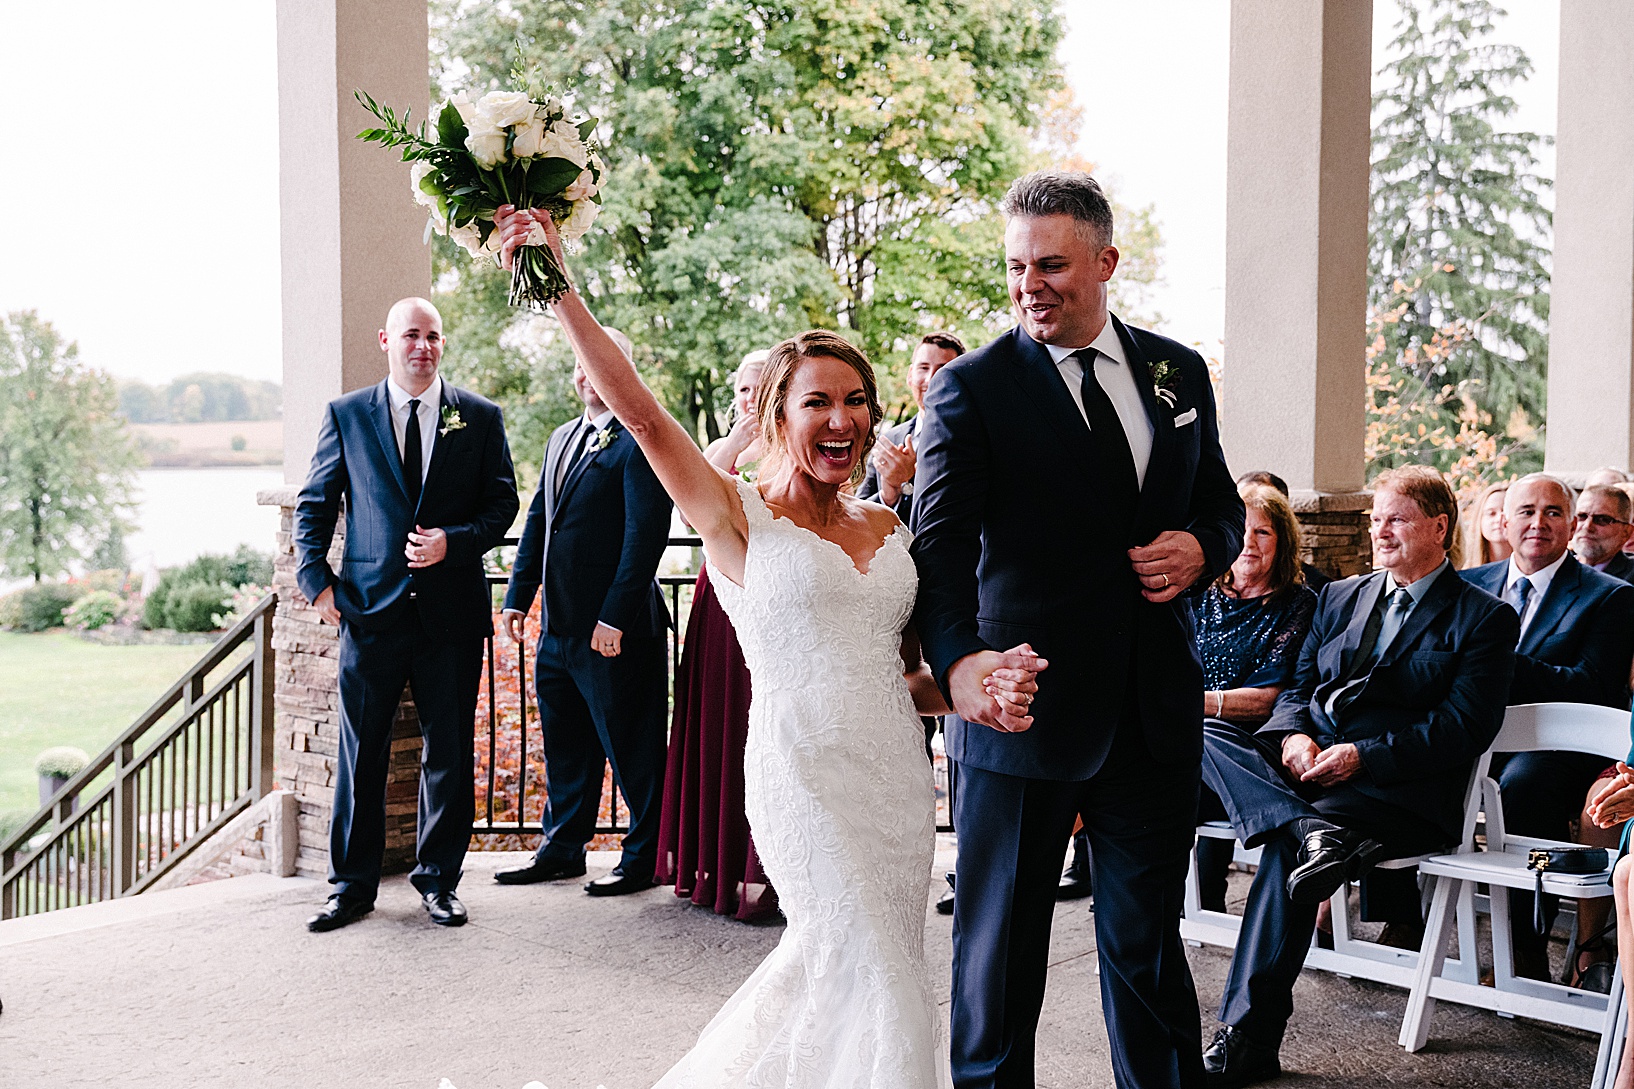 Bride holds her bouquet in the air during recessional while the groom holds her hand and smiles at her.